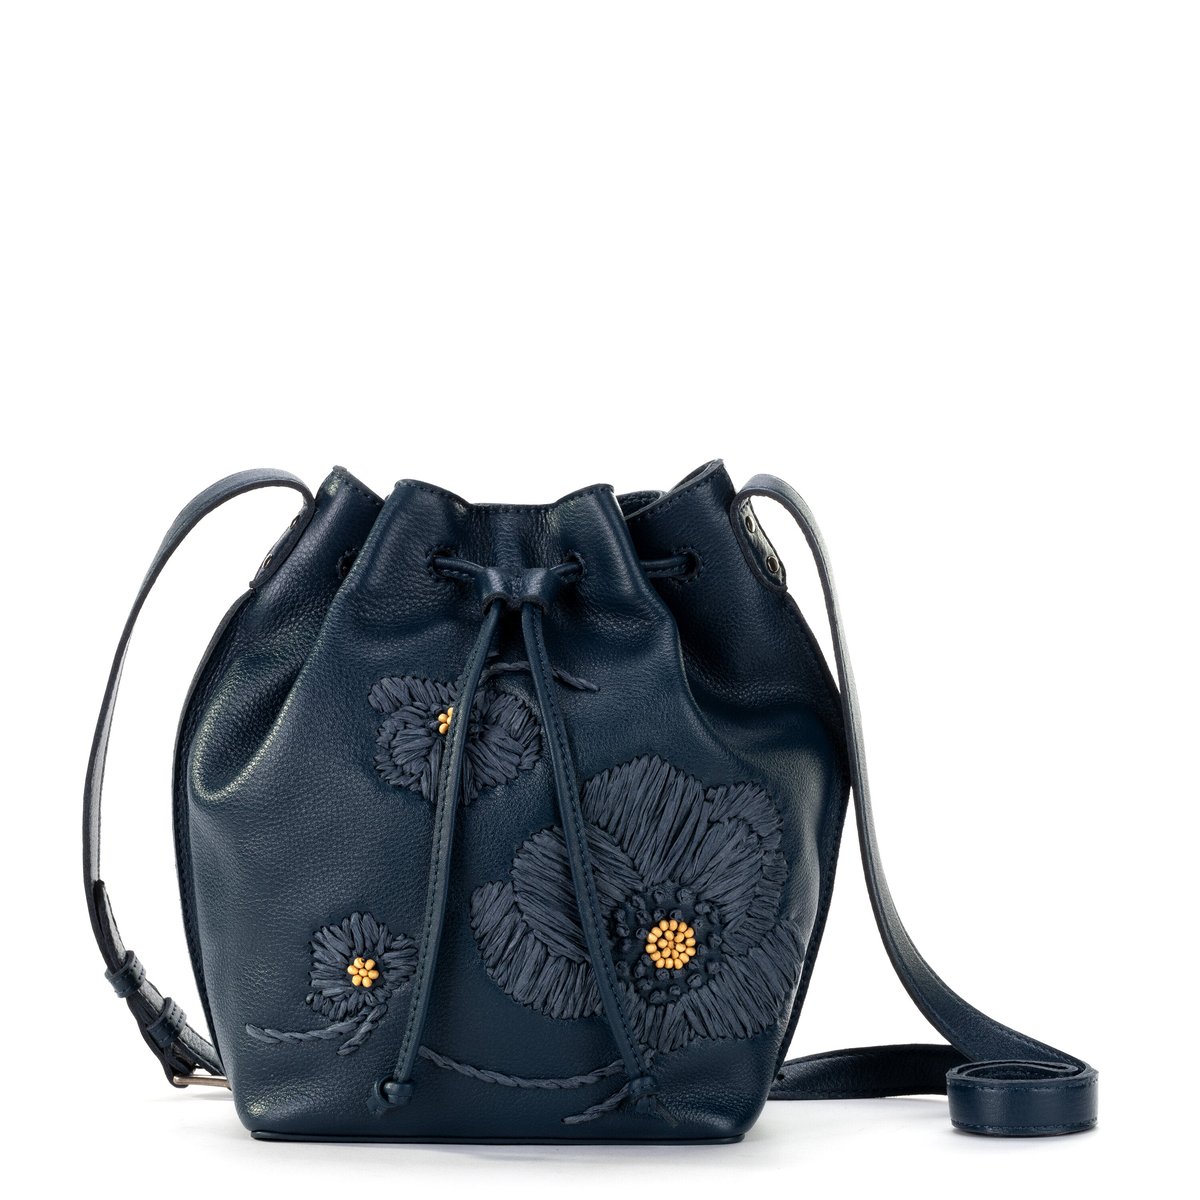  The Sak Ivy Drawstring Bucket Bag in Leather, Convertible Purse  with Crossbody Strap, Black Vachetta : Clothing, Shoes & Jewelry